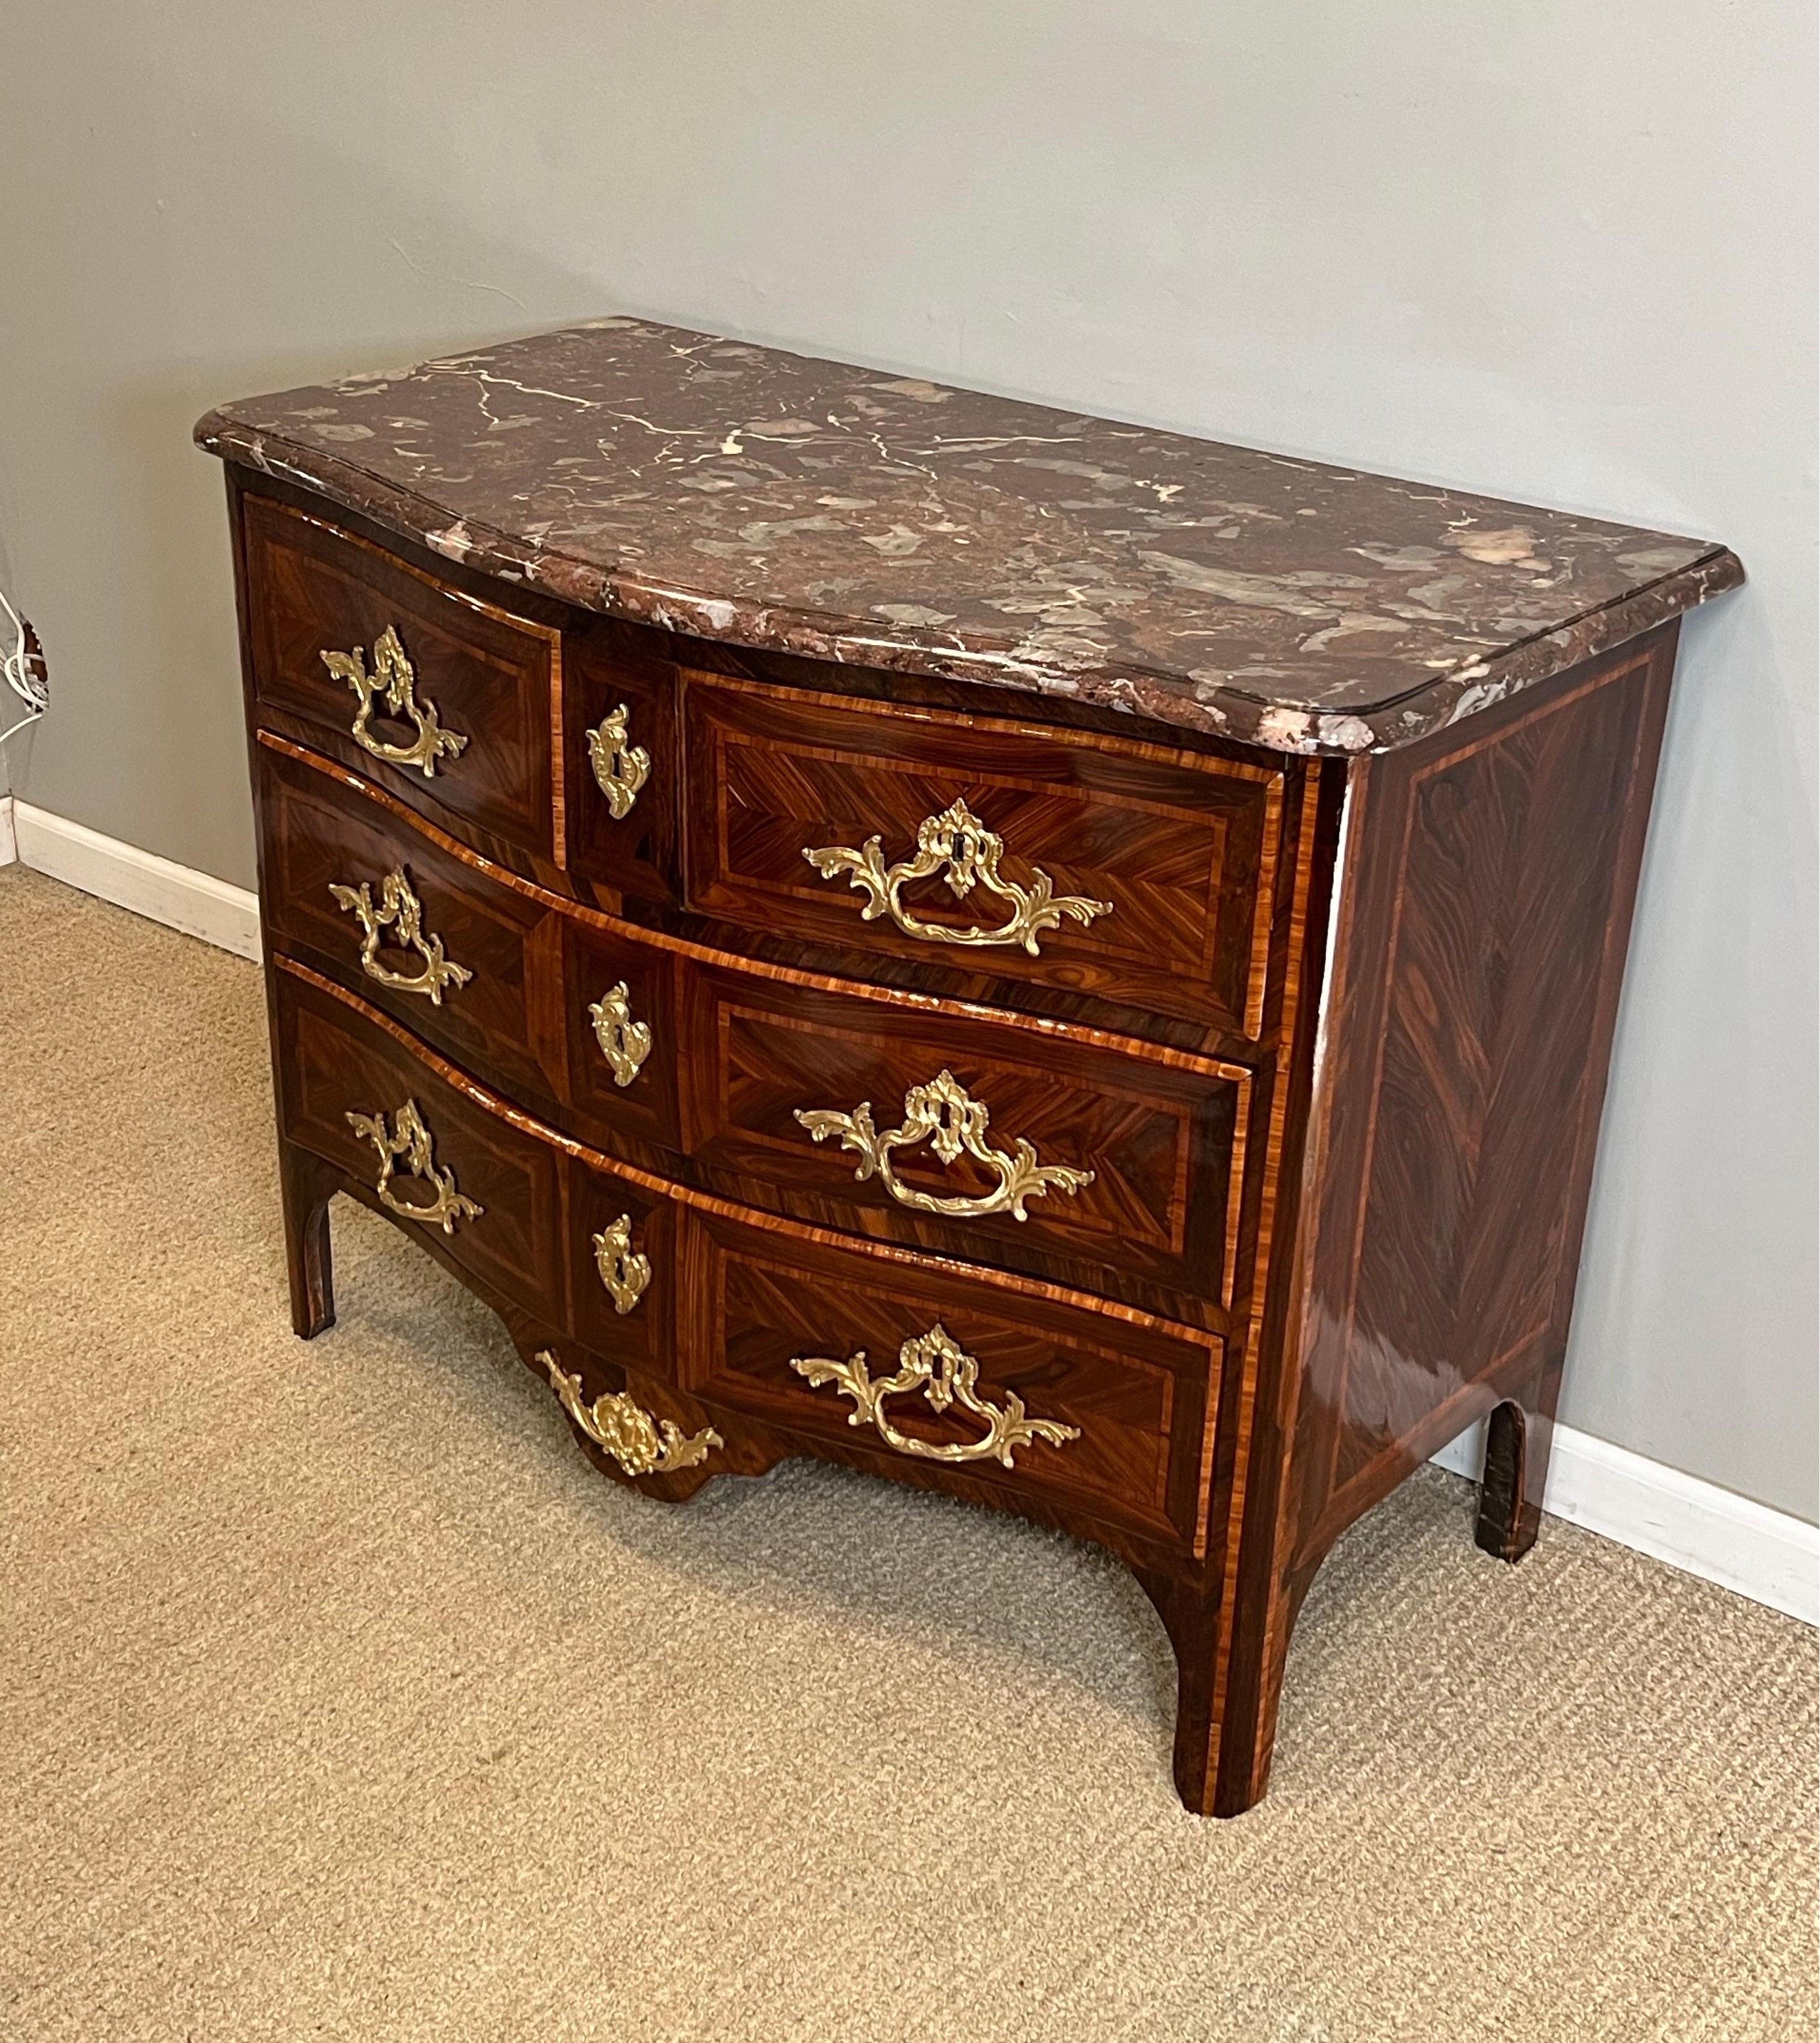 French Régence Ormolu-Mounted Rosewood & Kingwood Inlay Rouge Marble Top Commode For Sale 12